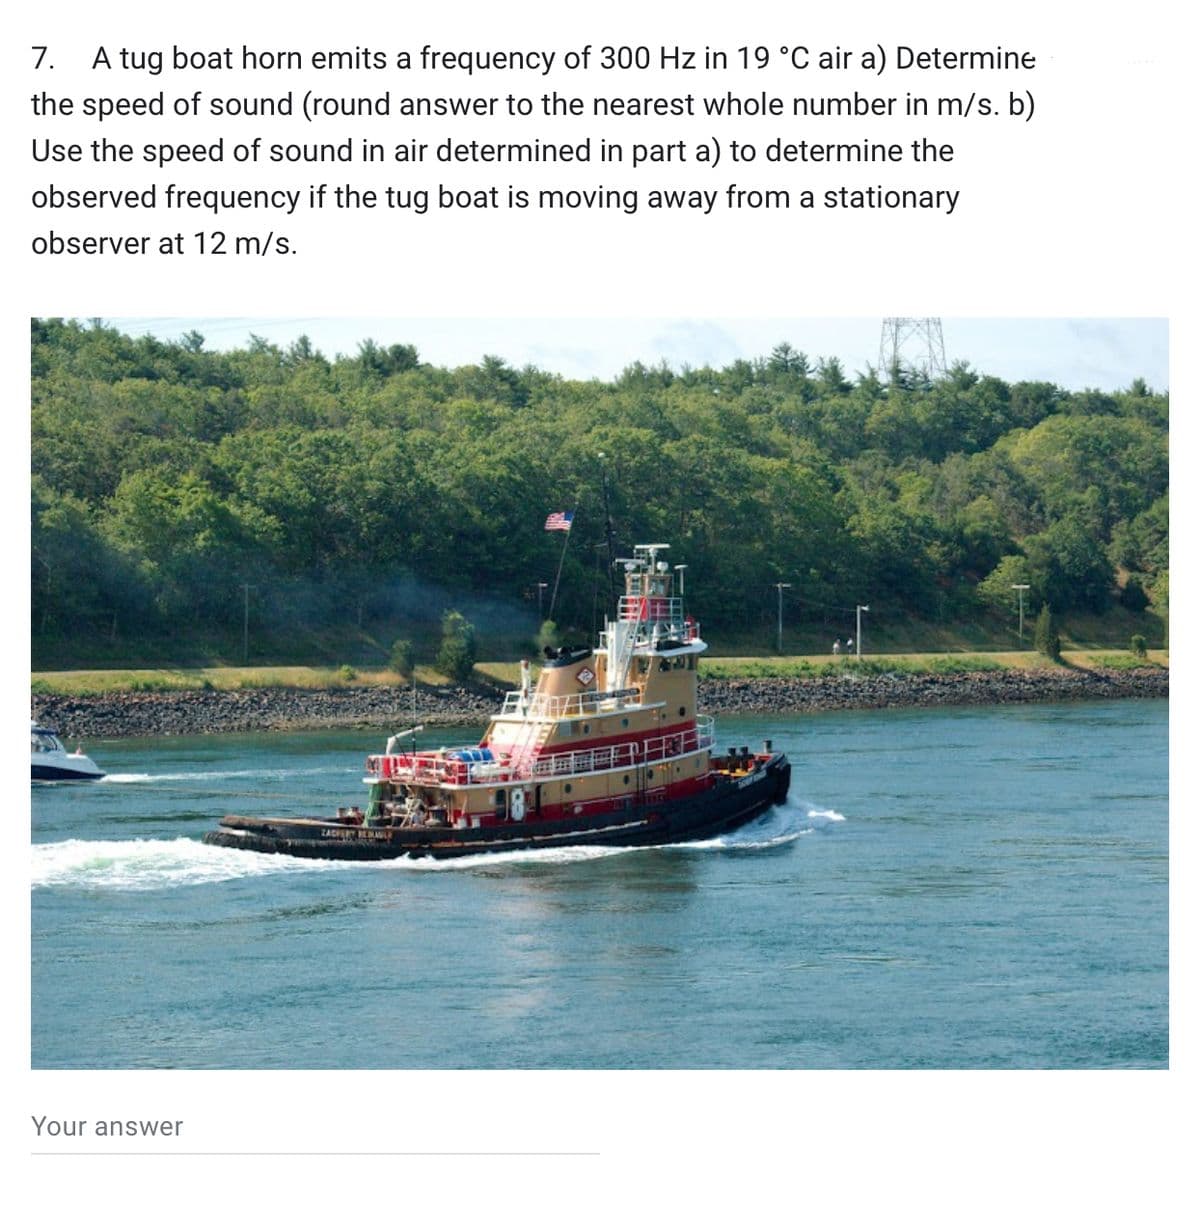 7. A tug boat horn emits a frequency of 300 Hz in 19 °C air a) Determine
the speed of sound (round answer to the nearest whole number in m/s. b)
Use the speed of sound in air determined in part a) to determine the
observed frequency if the tug boat is moving away from a stationary
observer at 12 m/s.
Your answer
ZACHERY BEAULA